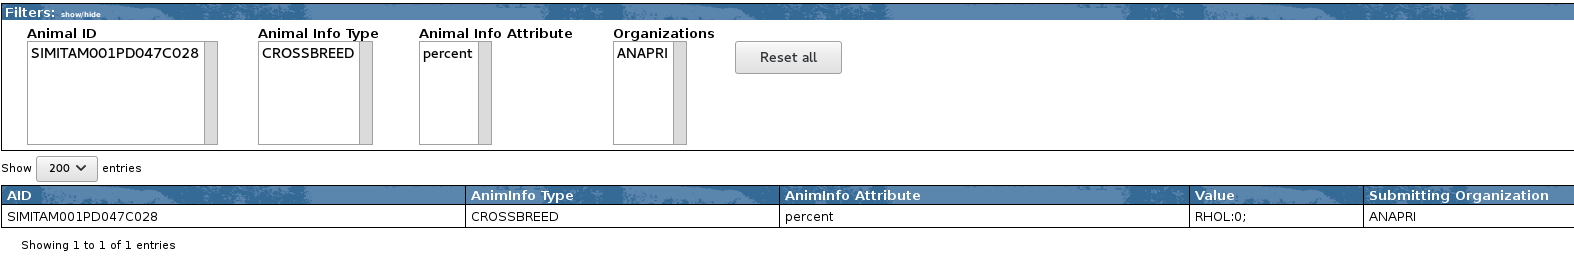 animinfo_animal_query2_file.png